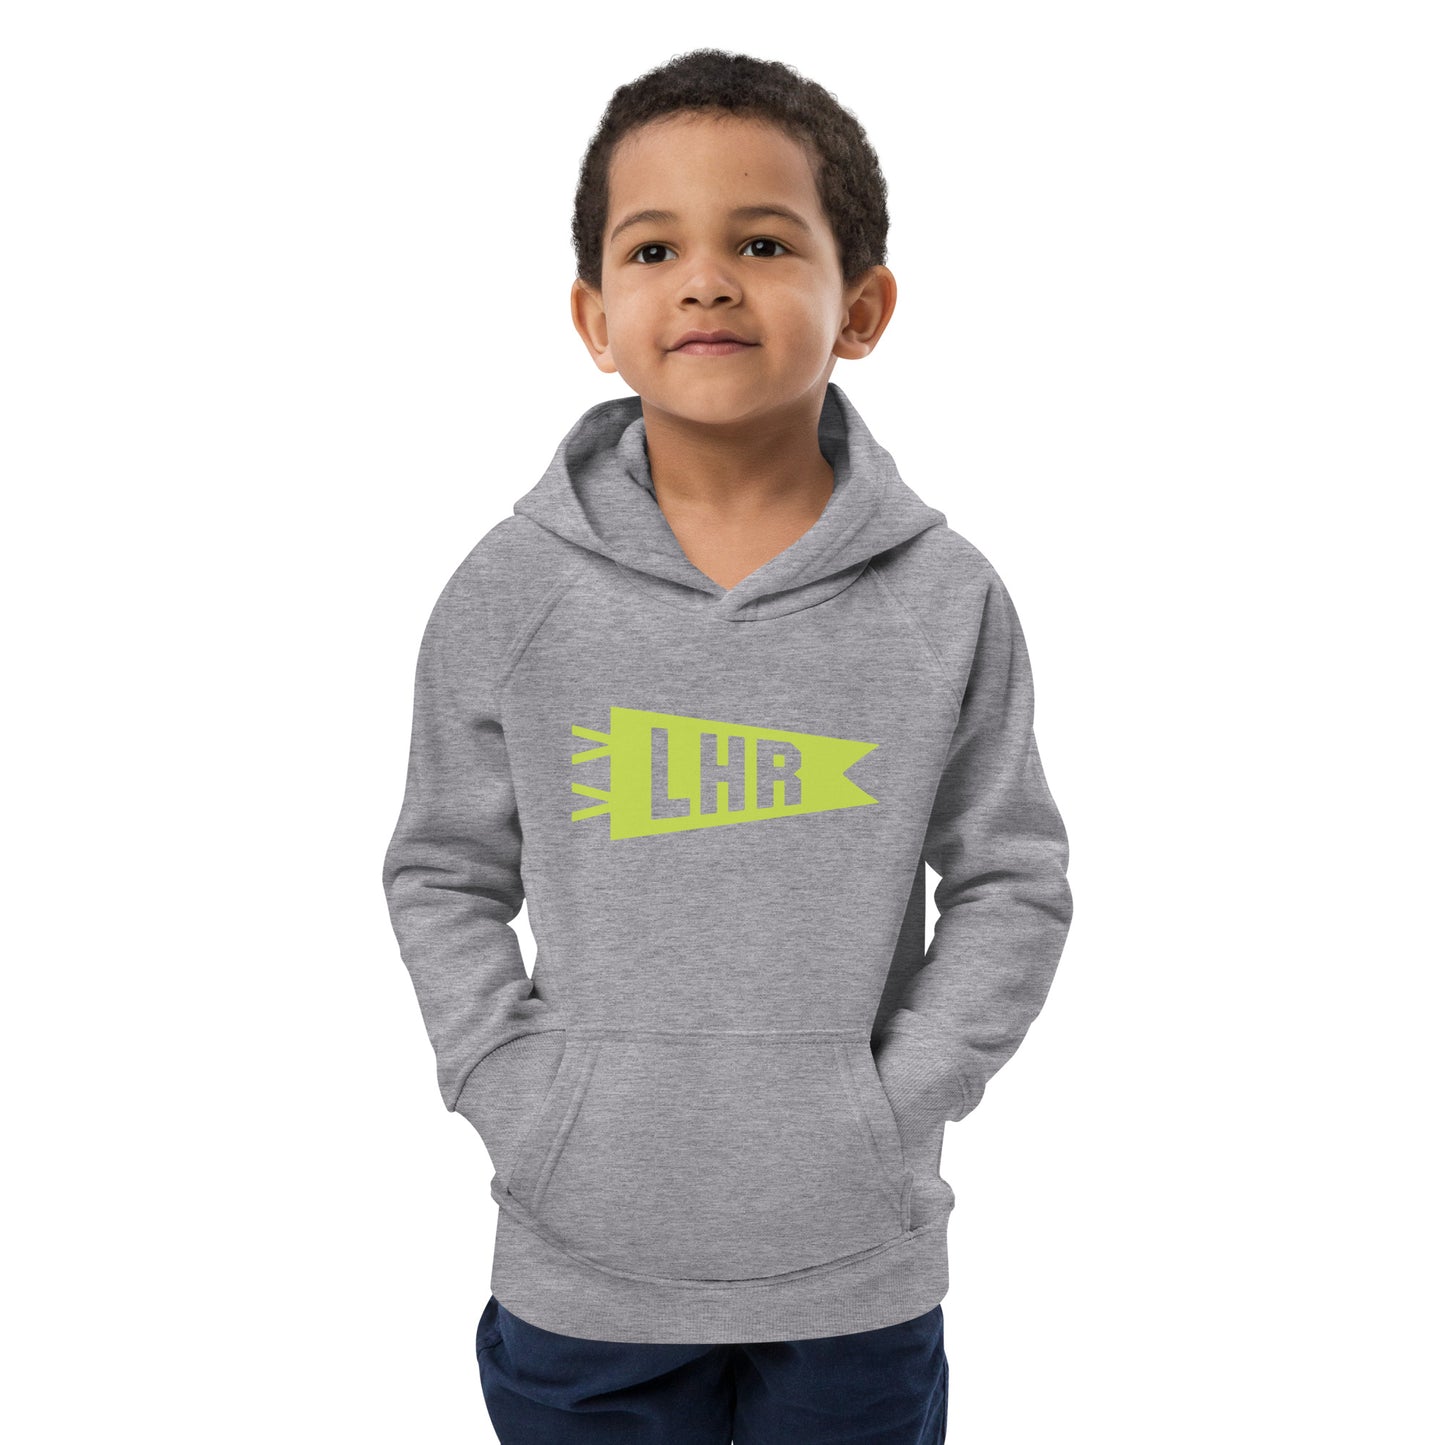 Kid's Sustainable Hoodie - Green Graphic • LHR London • YHM Designs - Image 11